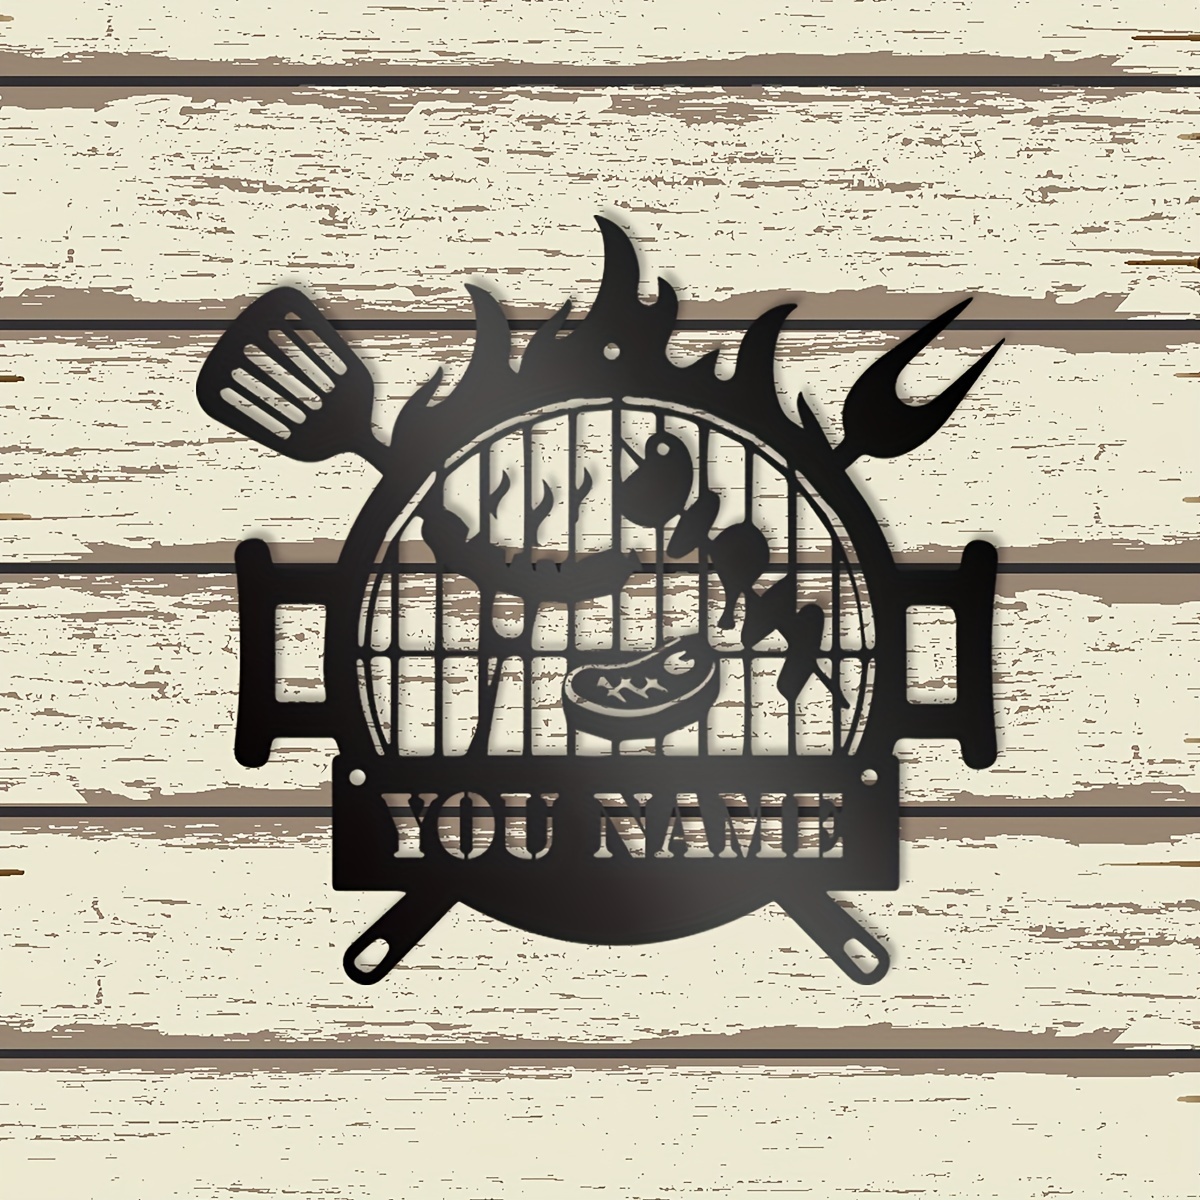 

1pc Personalized Metal Bbq Wall Decor, Customizable Barbecue Art Sign With Grill Design, Rustic Outdoor Kitchen Decor, Durable Metal Grilling Wall Sign, Perfect Gift For Dad & Housewarming